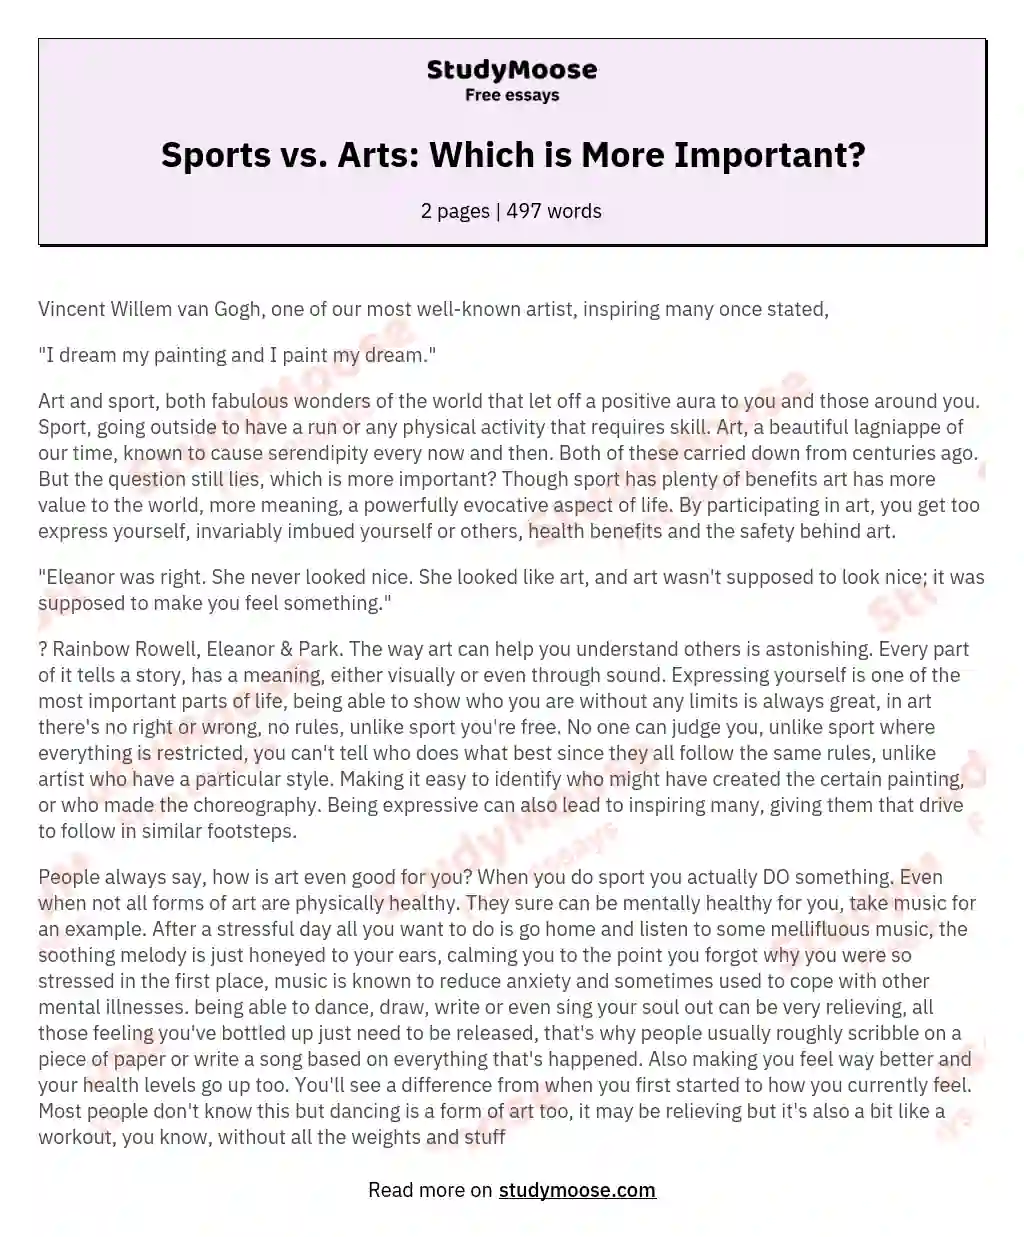 Sports vs. Arts: Which is More Important? essay